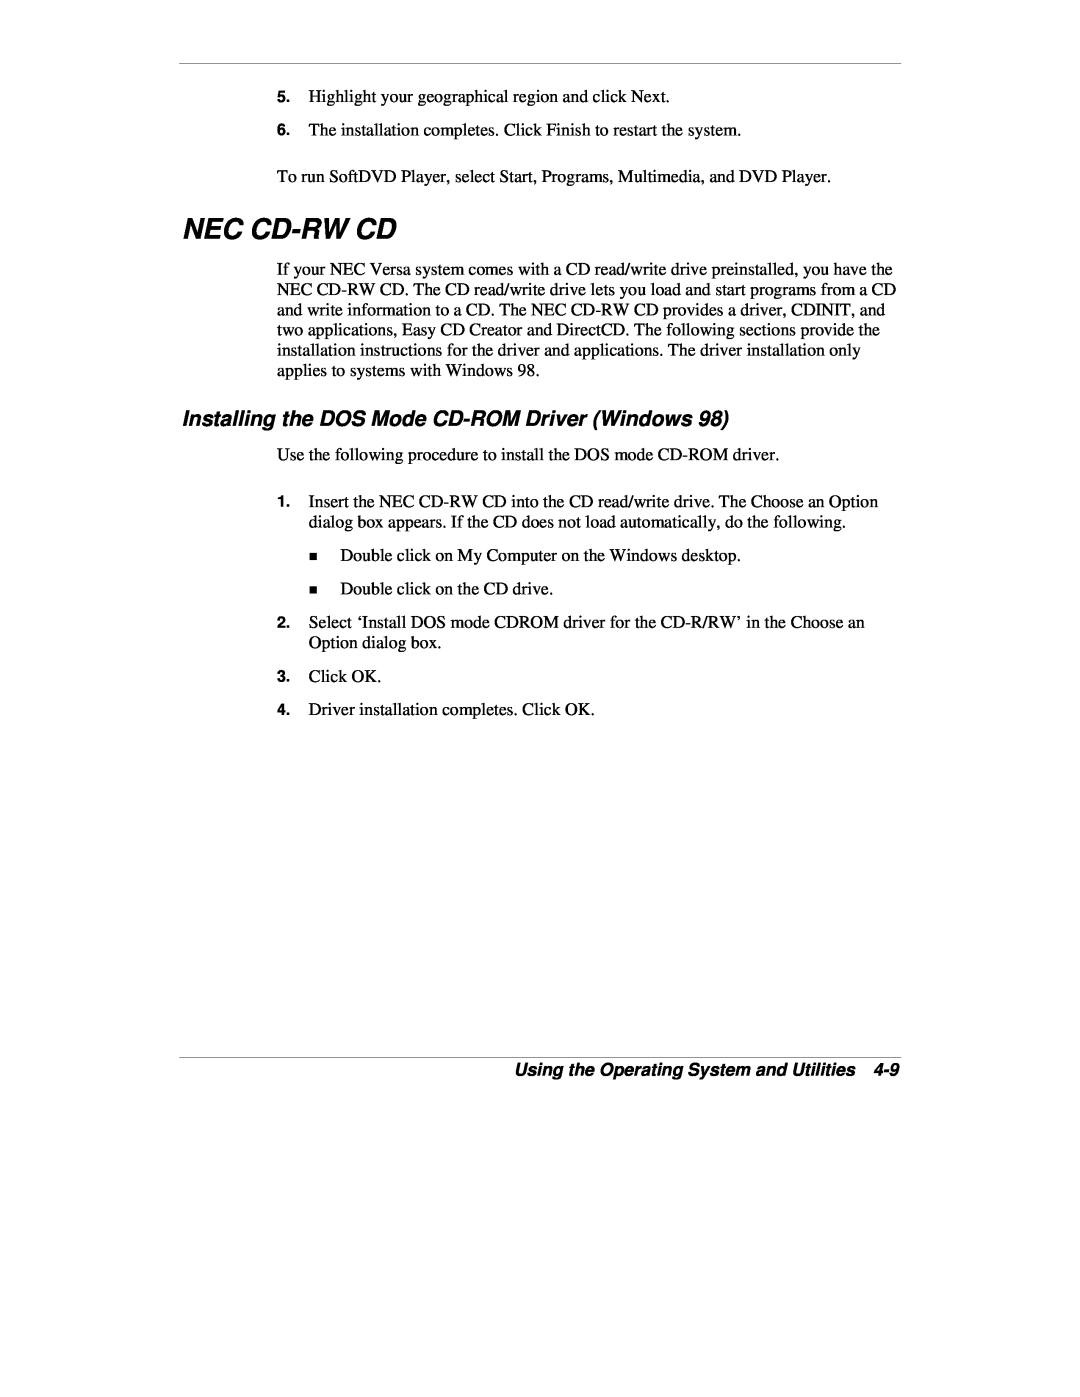 NEC VXi manual Nec Cd-Rwcd, Installing the DOS Mode CD-ROMDriver Windows, Using the Operating System and Utilities 